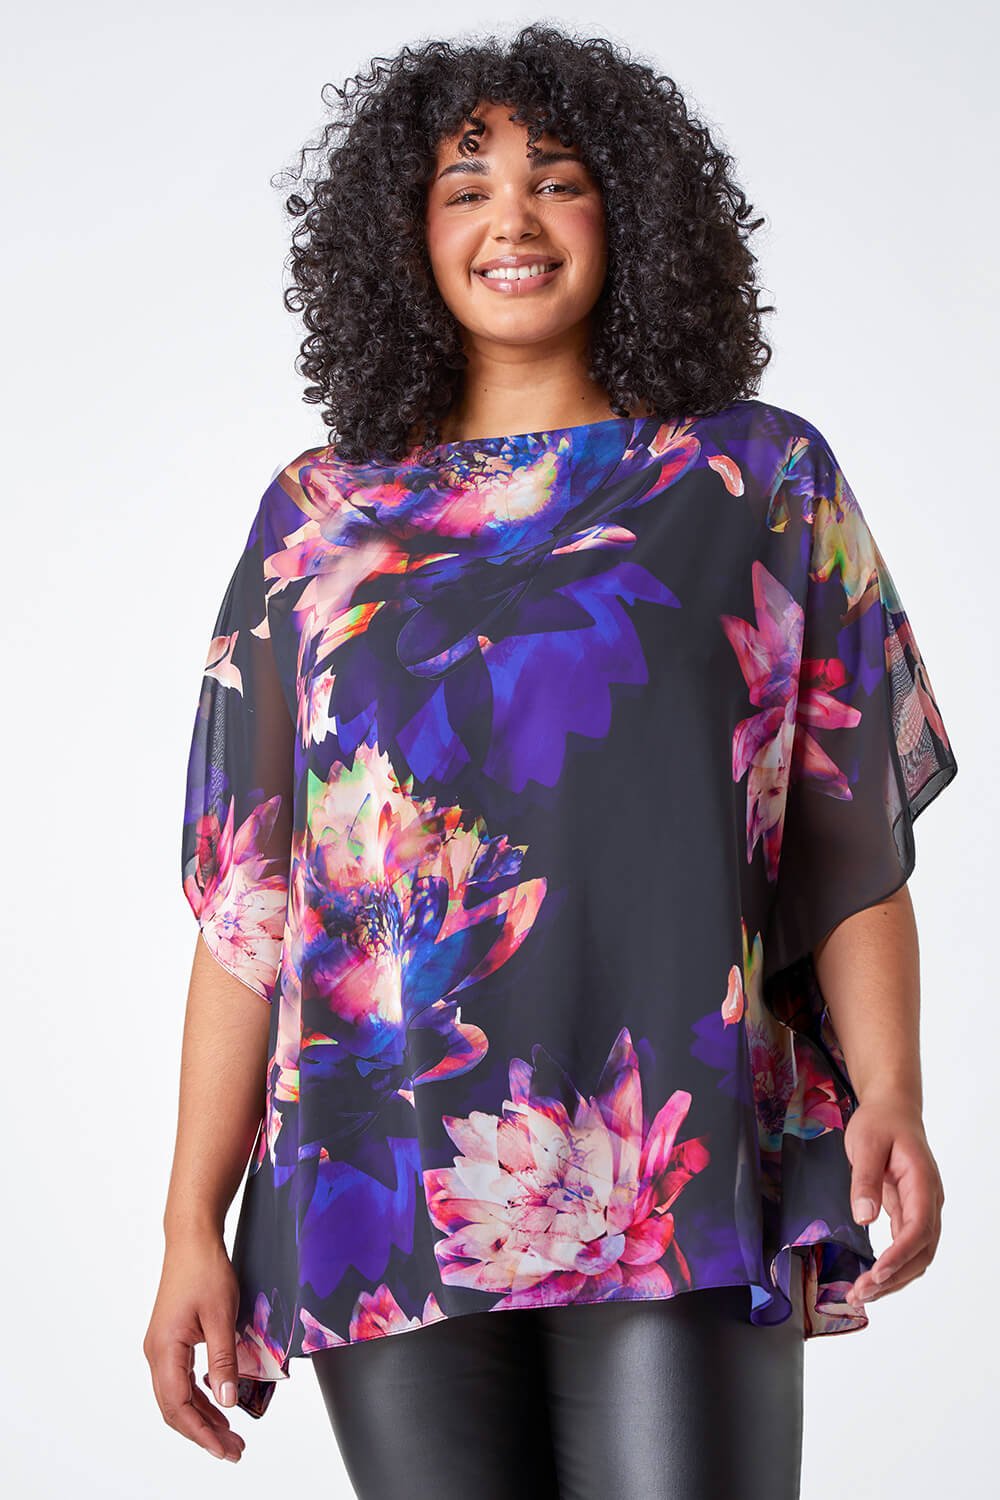 Black Curve Floral Print Chiffon Overlay Top, Image 2 of 5